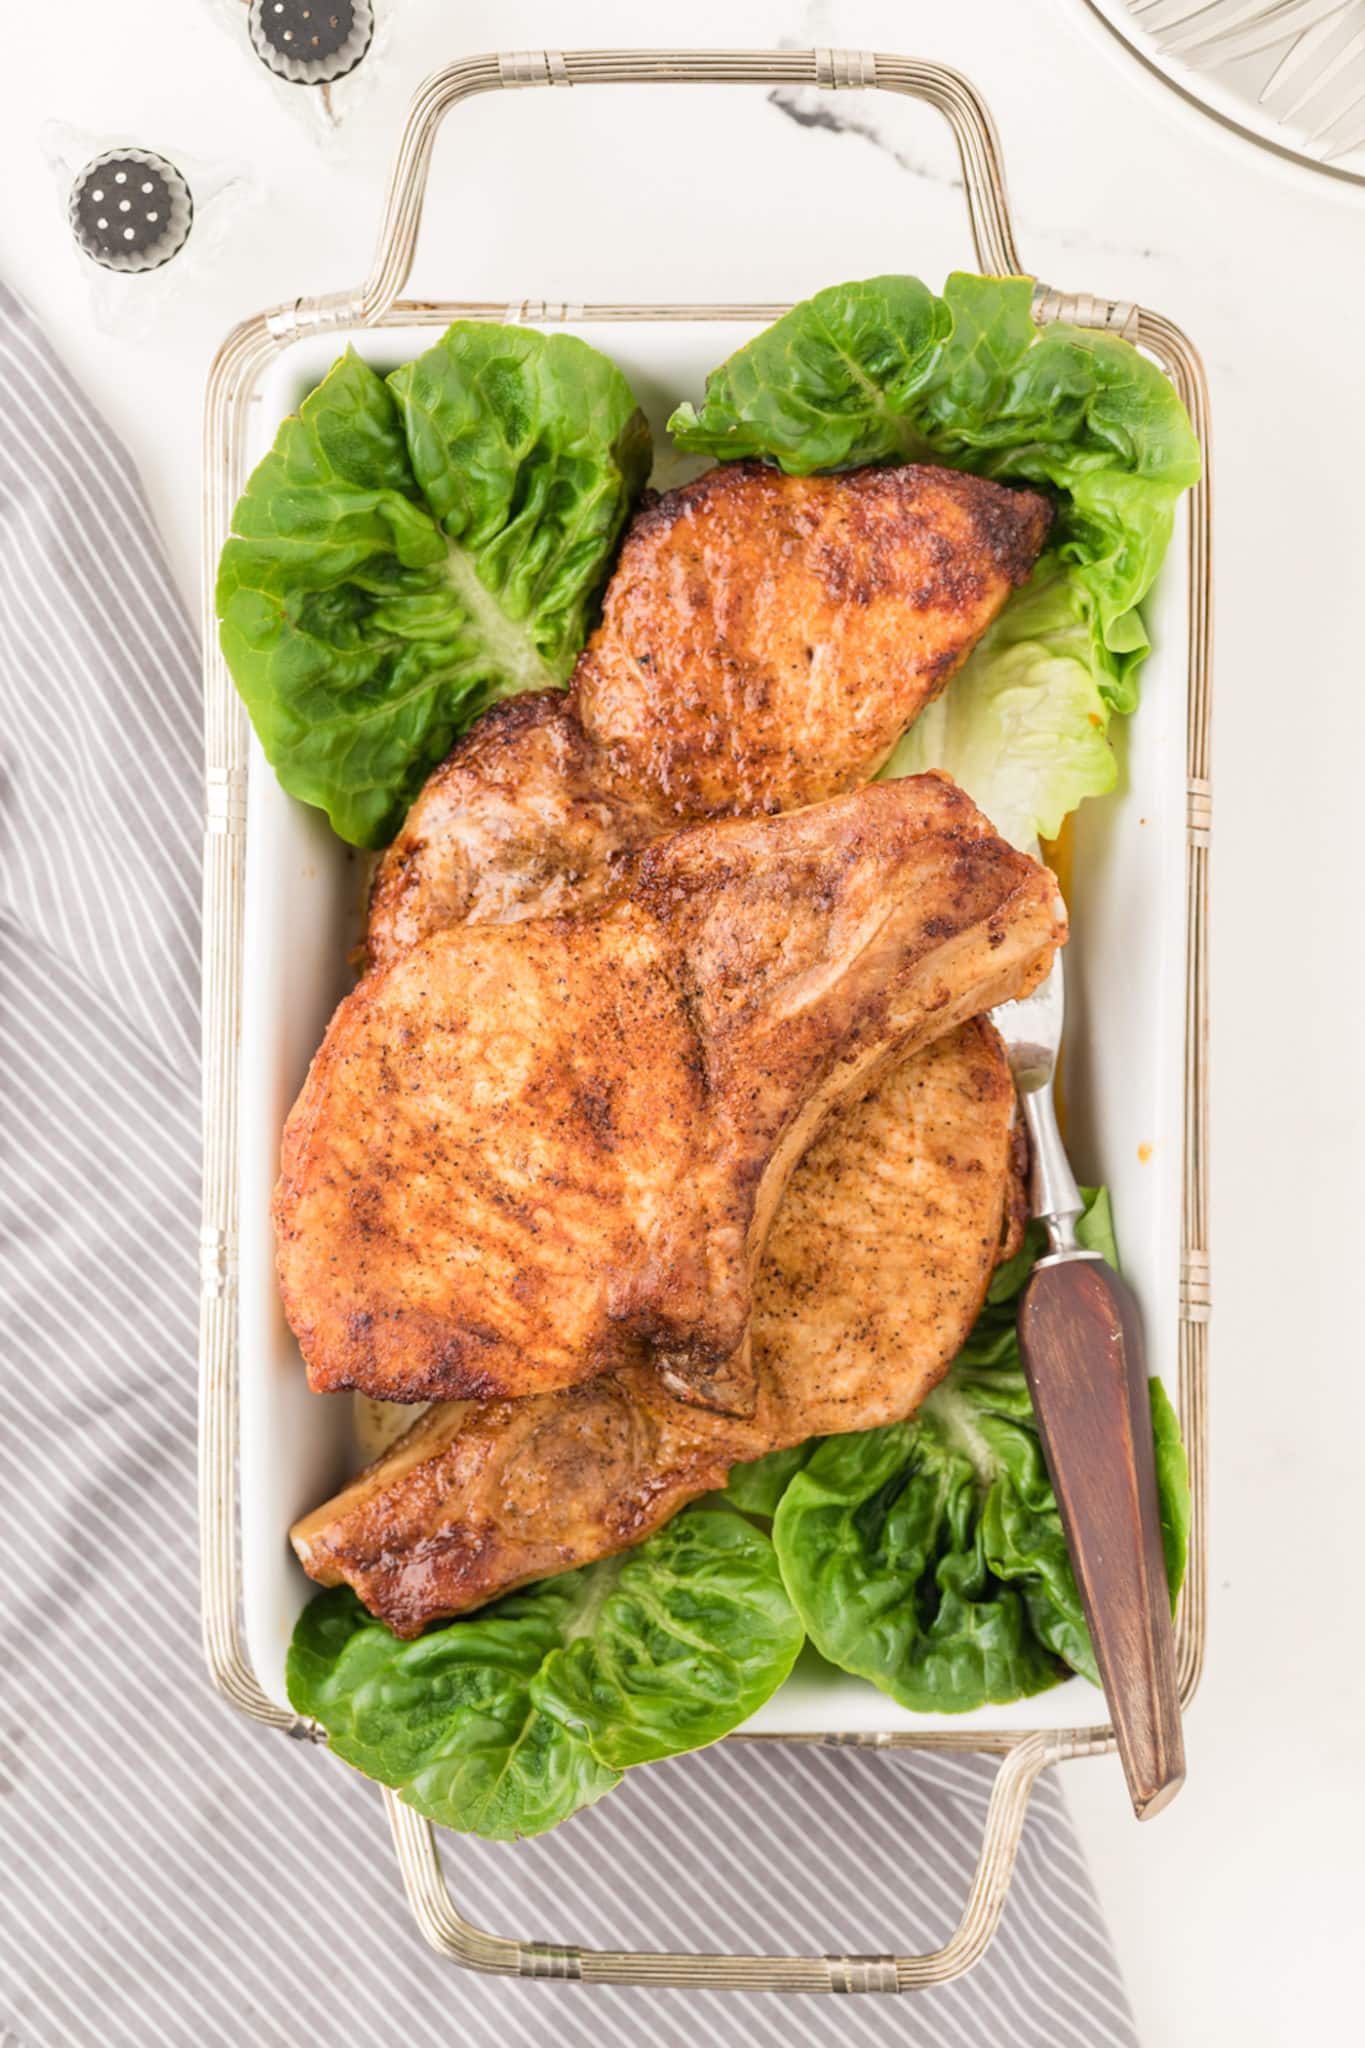 cooked pork chops on a serving dish with lettuce